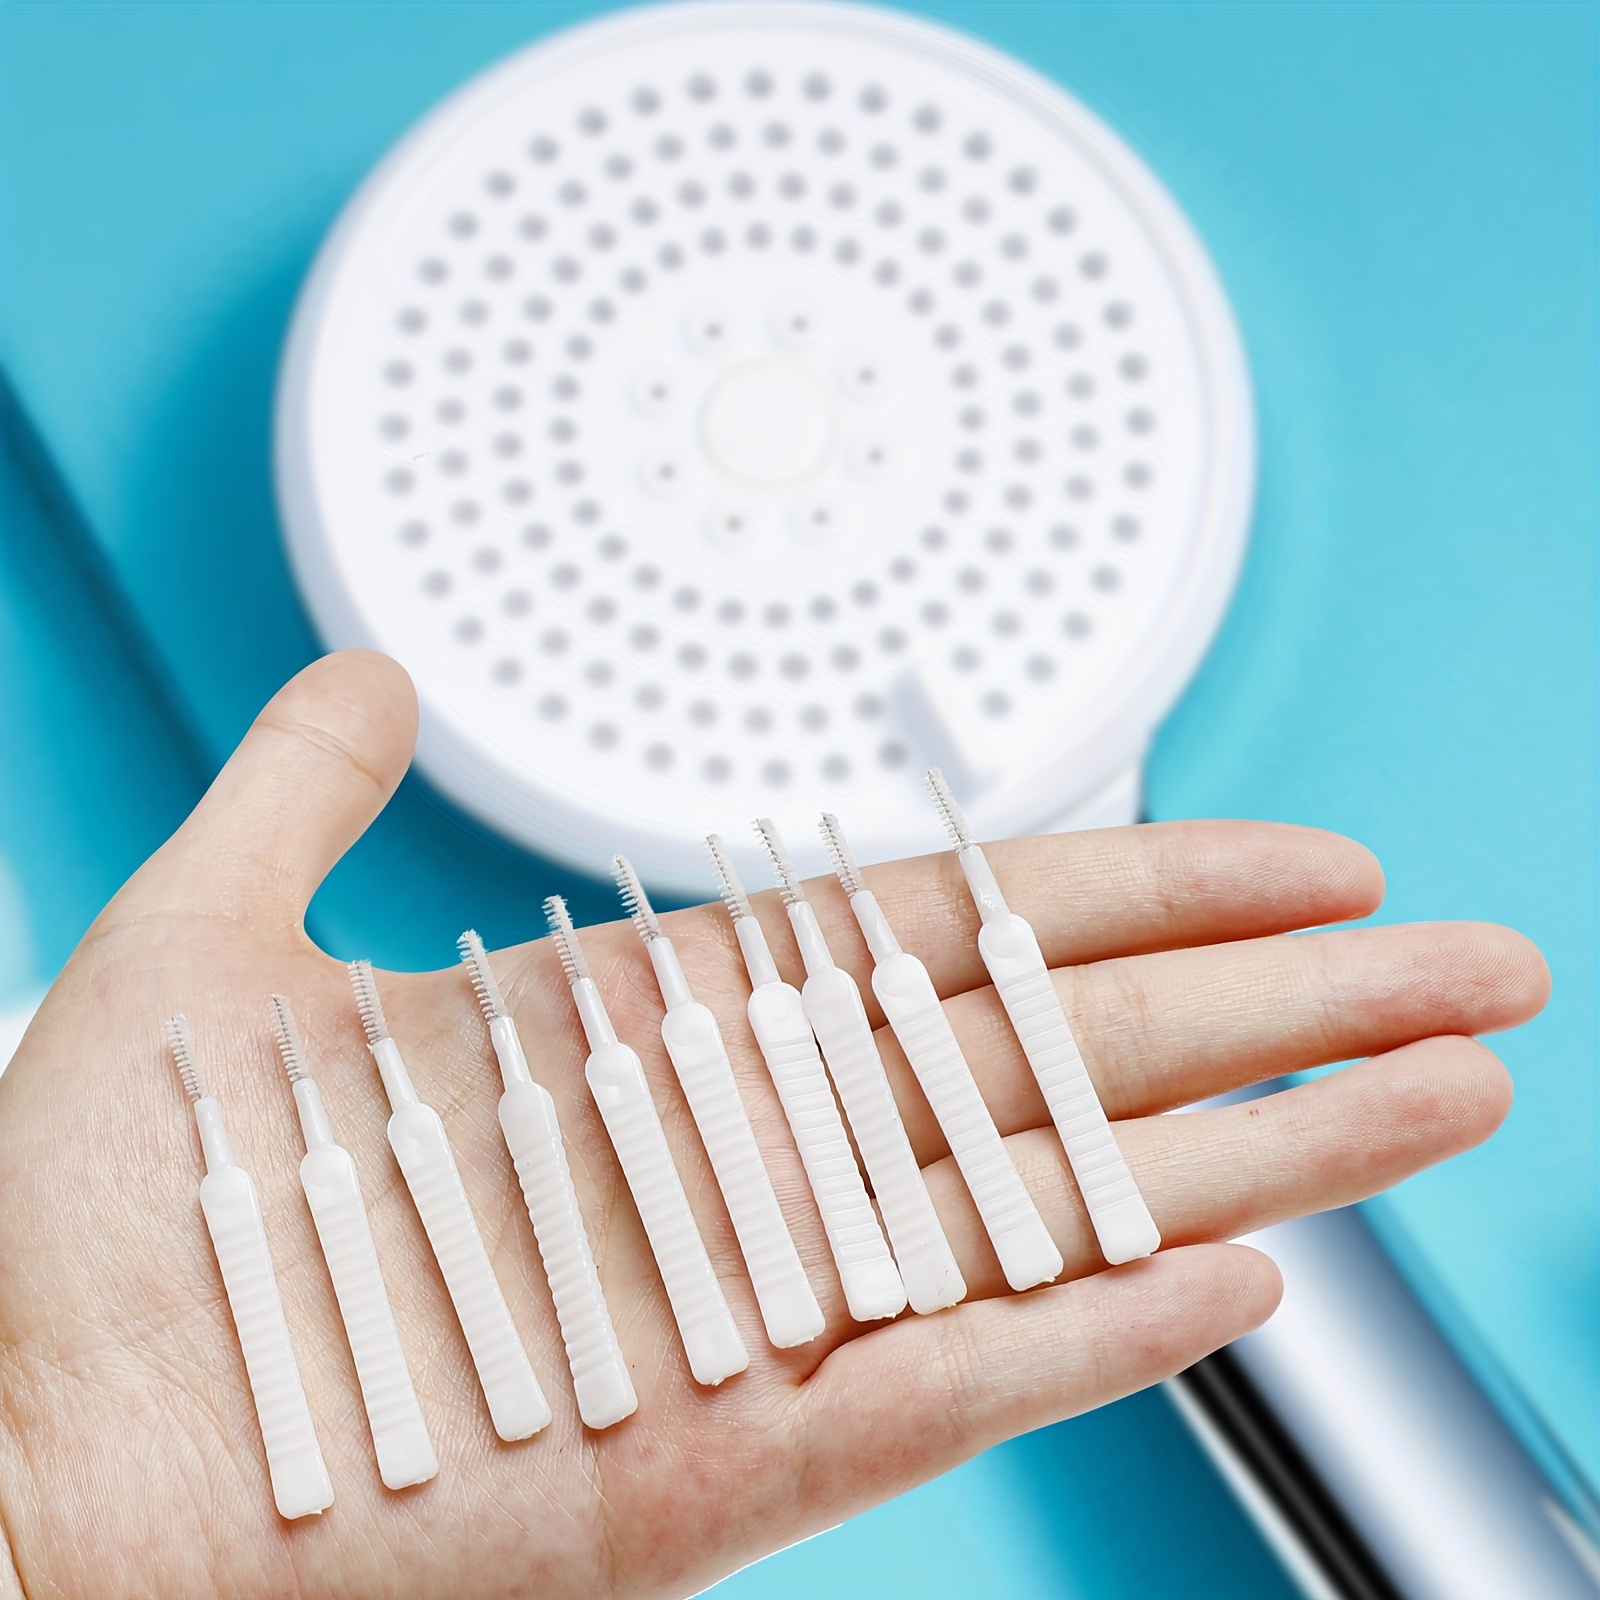 30pcs Shower Head Cleaning Brush, Multifunctional Hole Cleaning Brush For Shower  Nozzle, Keyboard And Other Small Openings To Prevent Clogging